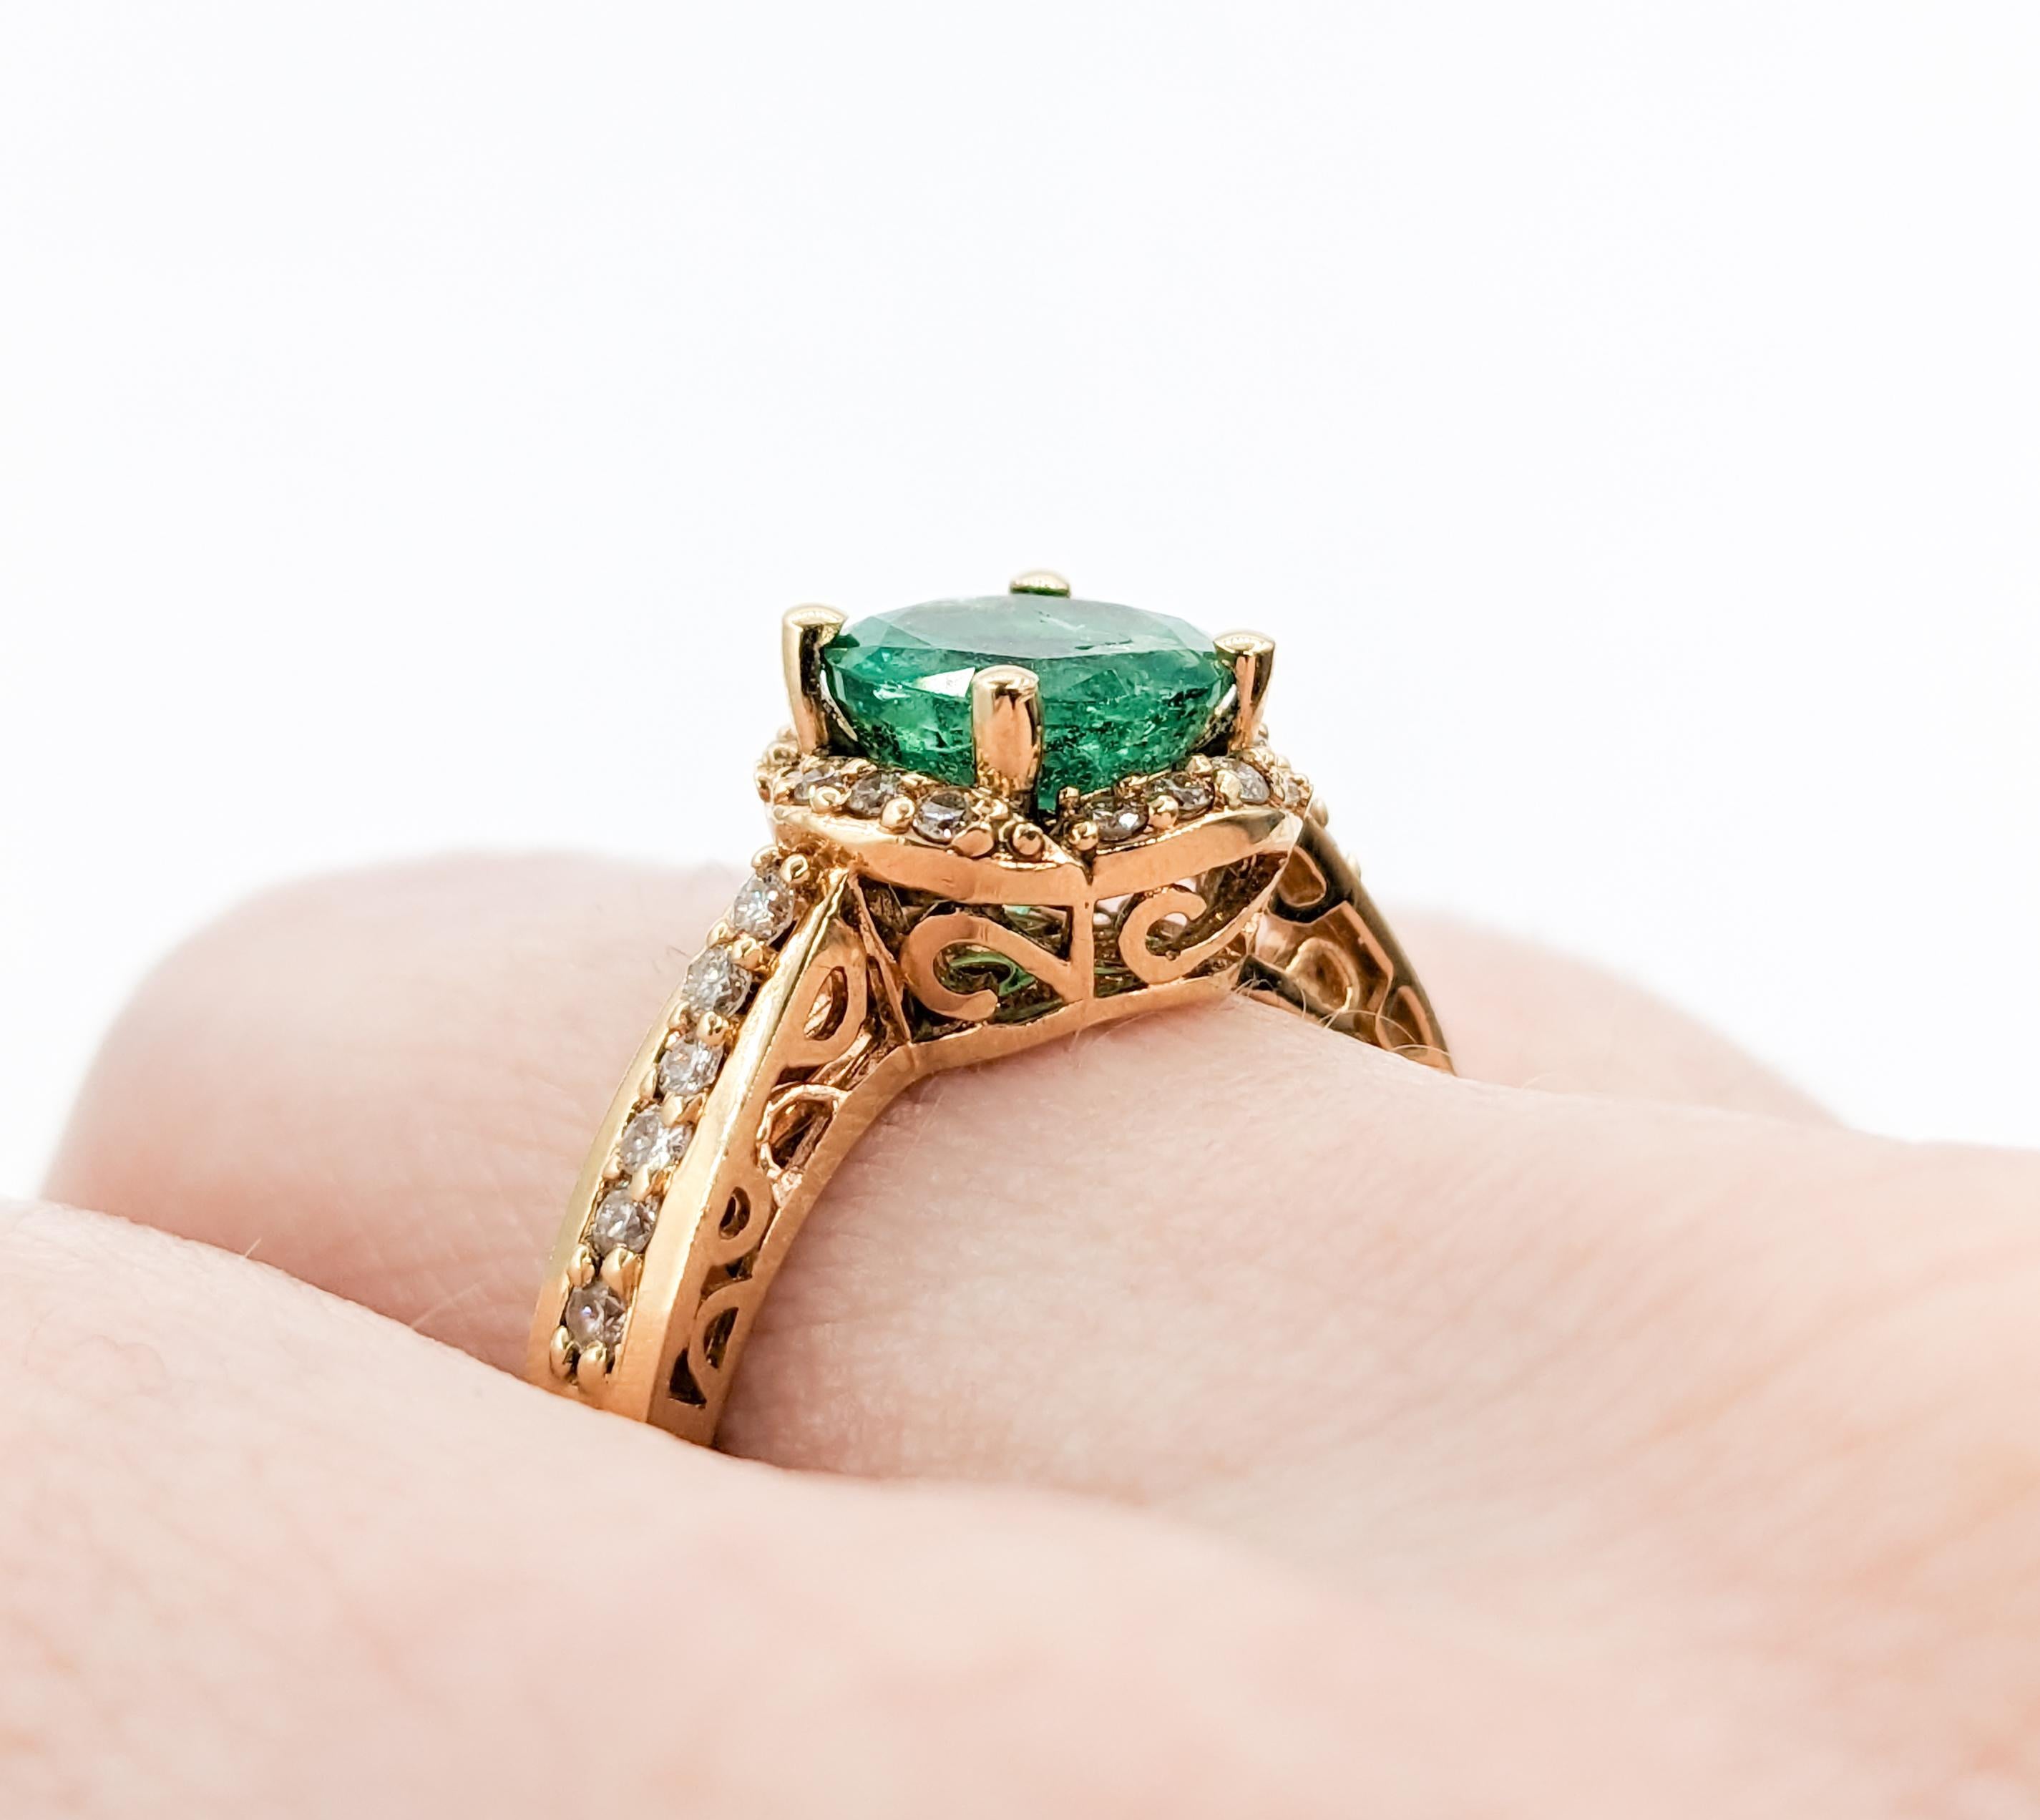 1.68ct Emerald & Diamond Ring In Yellow Gold

Introducing this lovely Emerald and Diamond Ring, expertly crafted in 14k yellow gold. This ring features breathtaking a 1.68ct emerald, adding a touch of lush green elegance to the design. Further